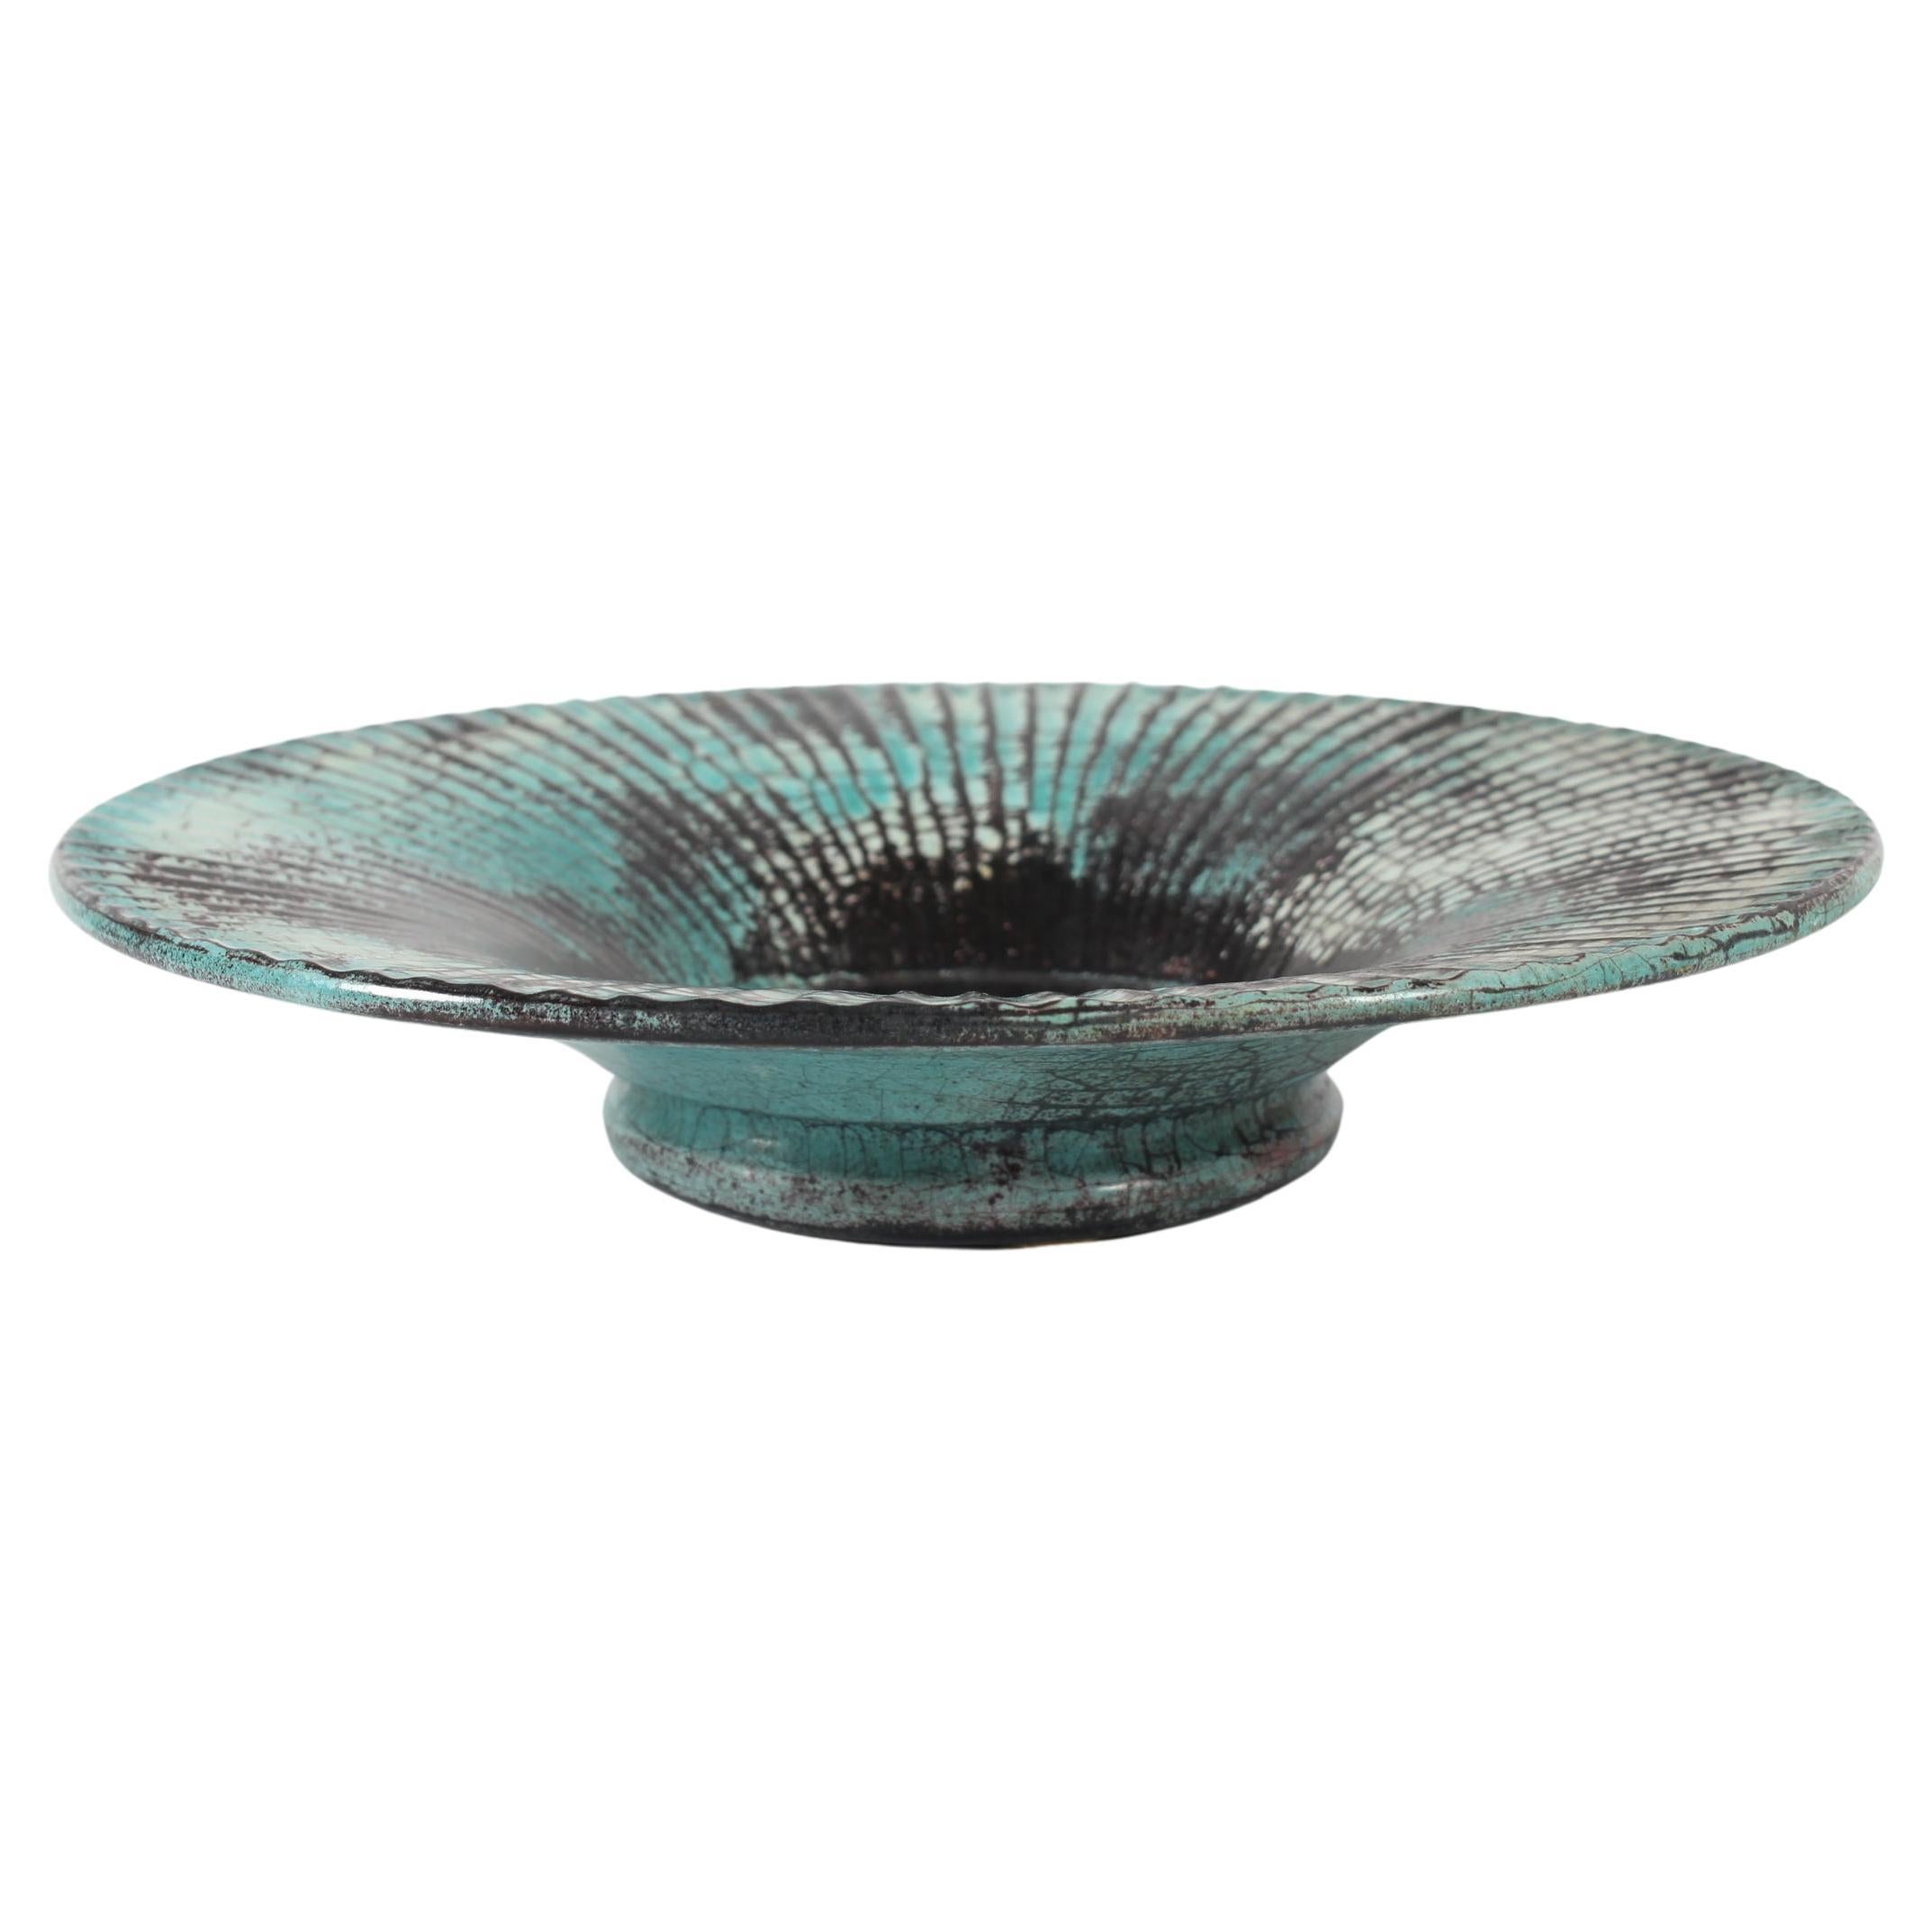 Large Art Deco ceramic platter/ low bowl by Nils Kähler in the 1930s for the pottery work-shop Kähler in Næstved, Denmark.

The bowl has a grooved fluted design with verdigris green, black and beige glaze.
This type of glaze was also often used by